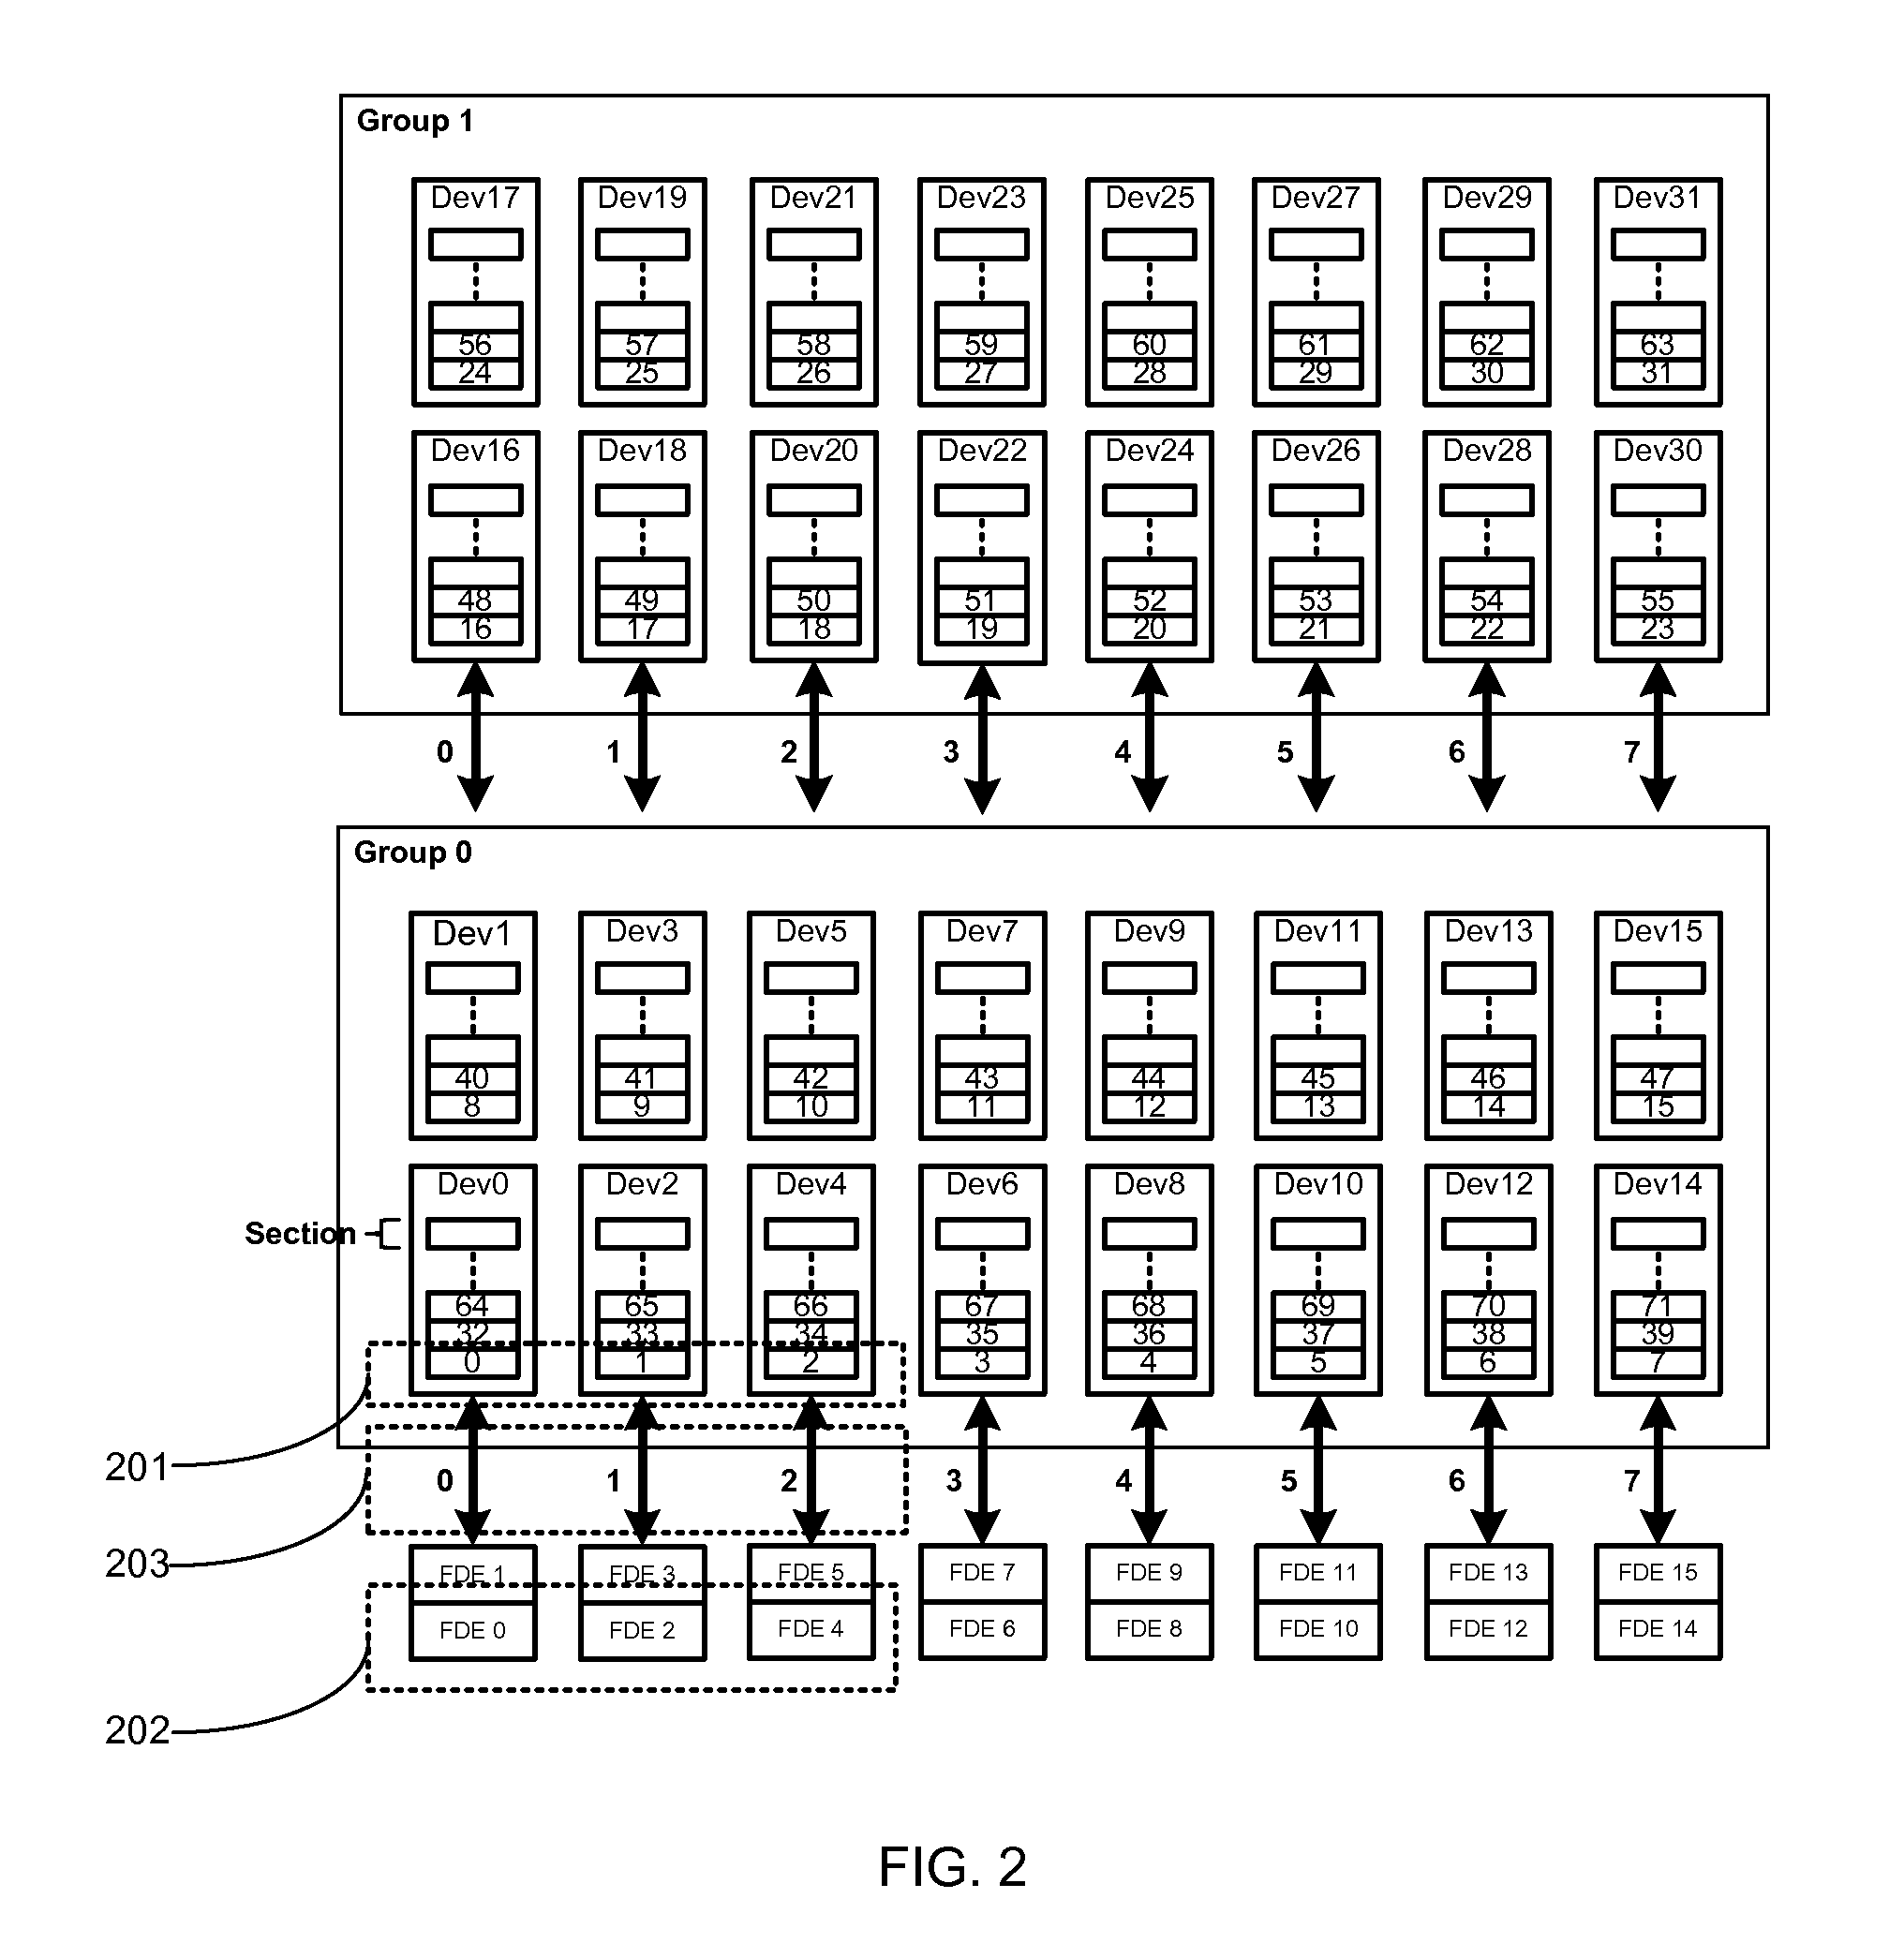 Optimized placement policy for solid state storage devices